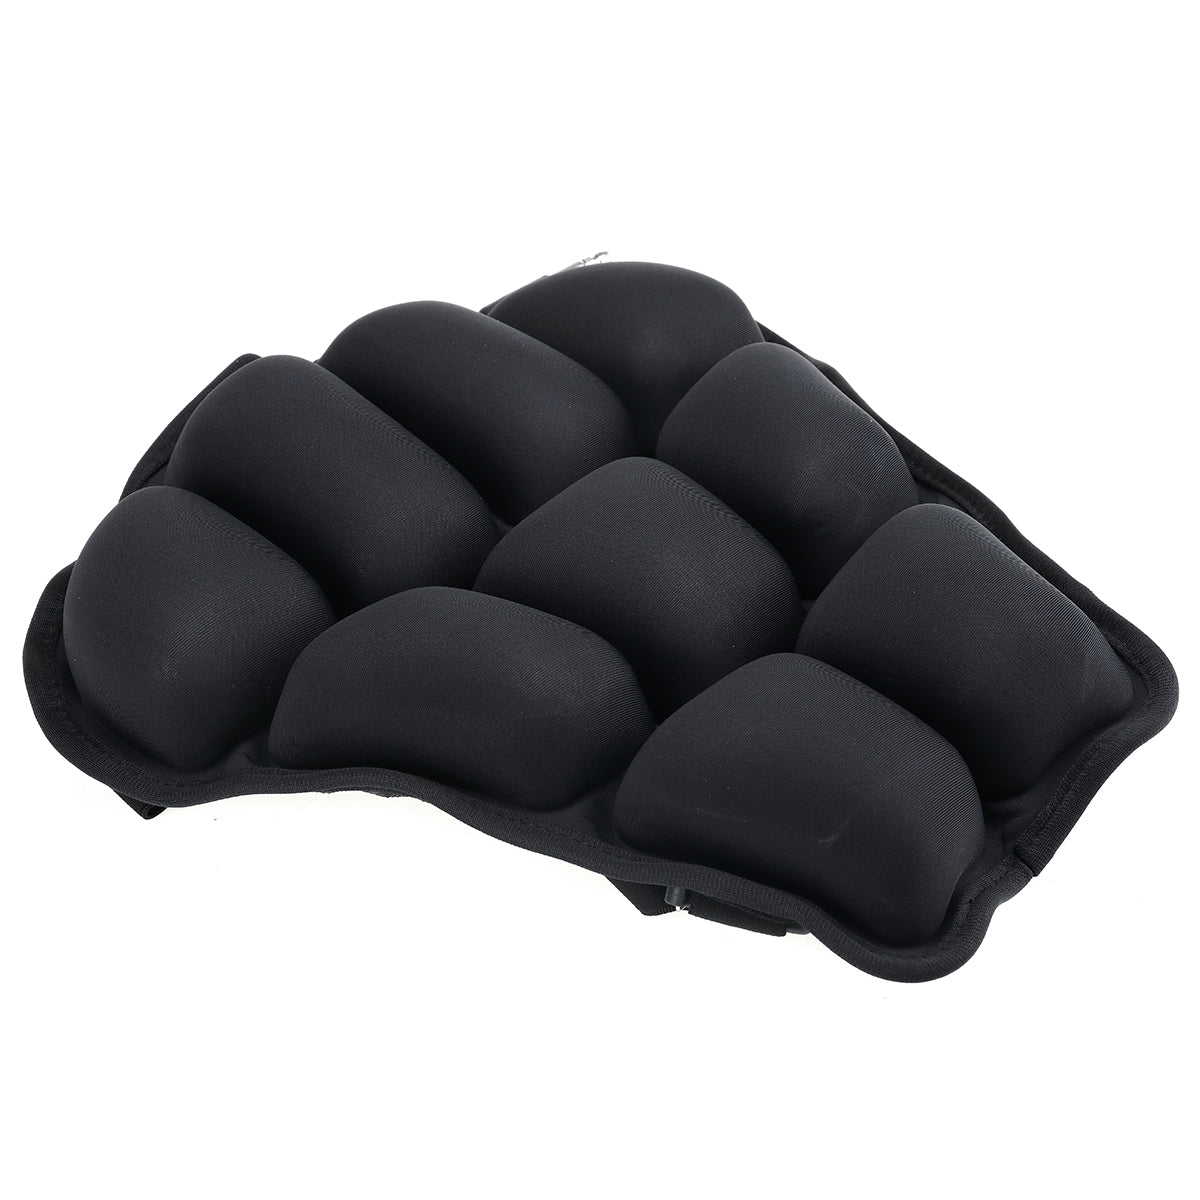 Dark Slate Gray 3D Inflatable Air Seat Cushion Motorcycle Cruiser Touring Saddle Pressure Relief